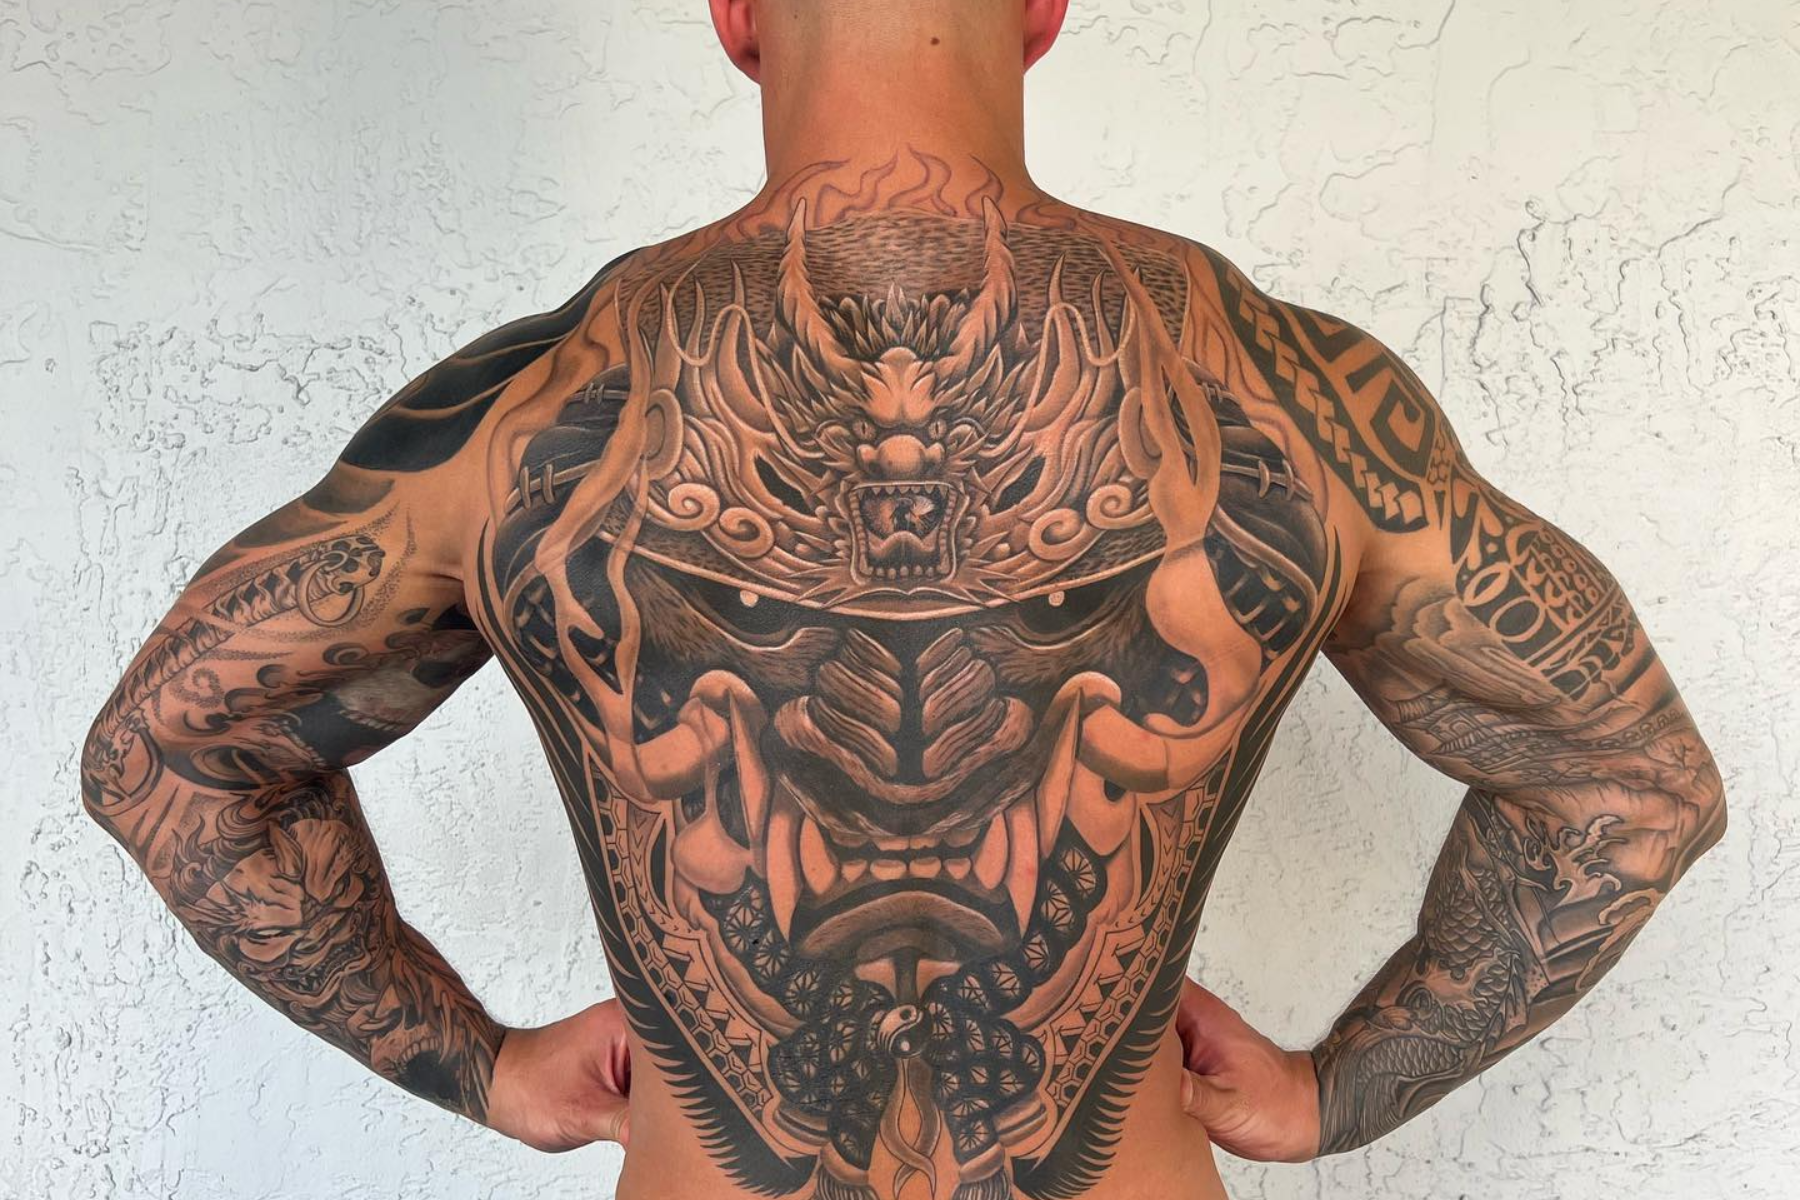 A man holding his waist has a full back tattoo